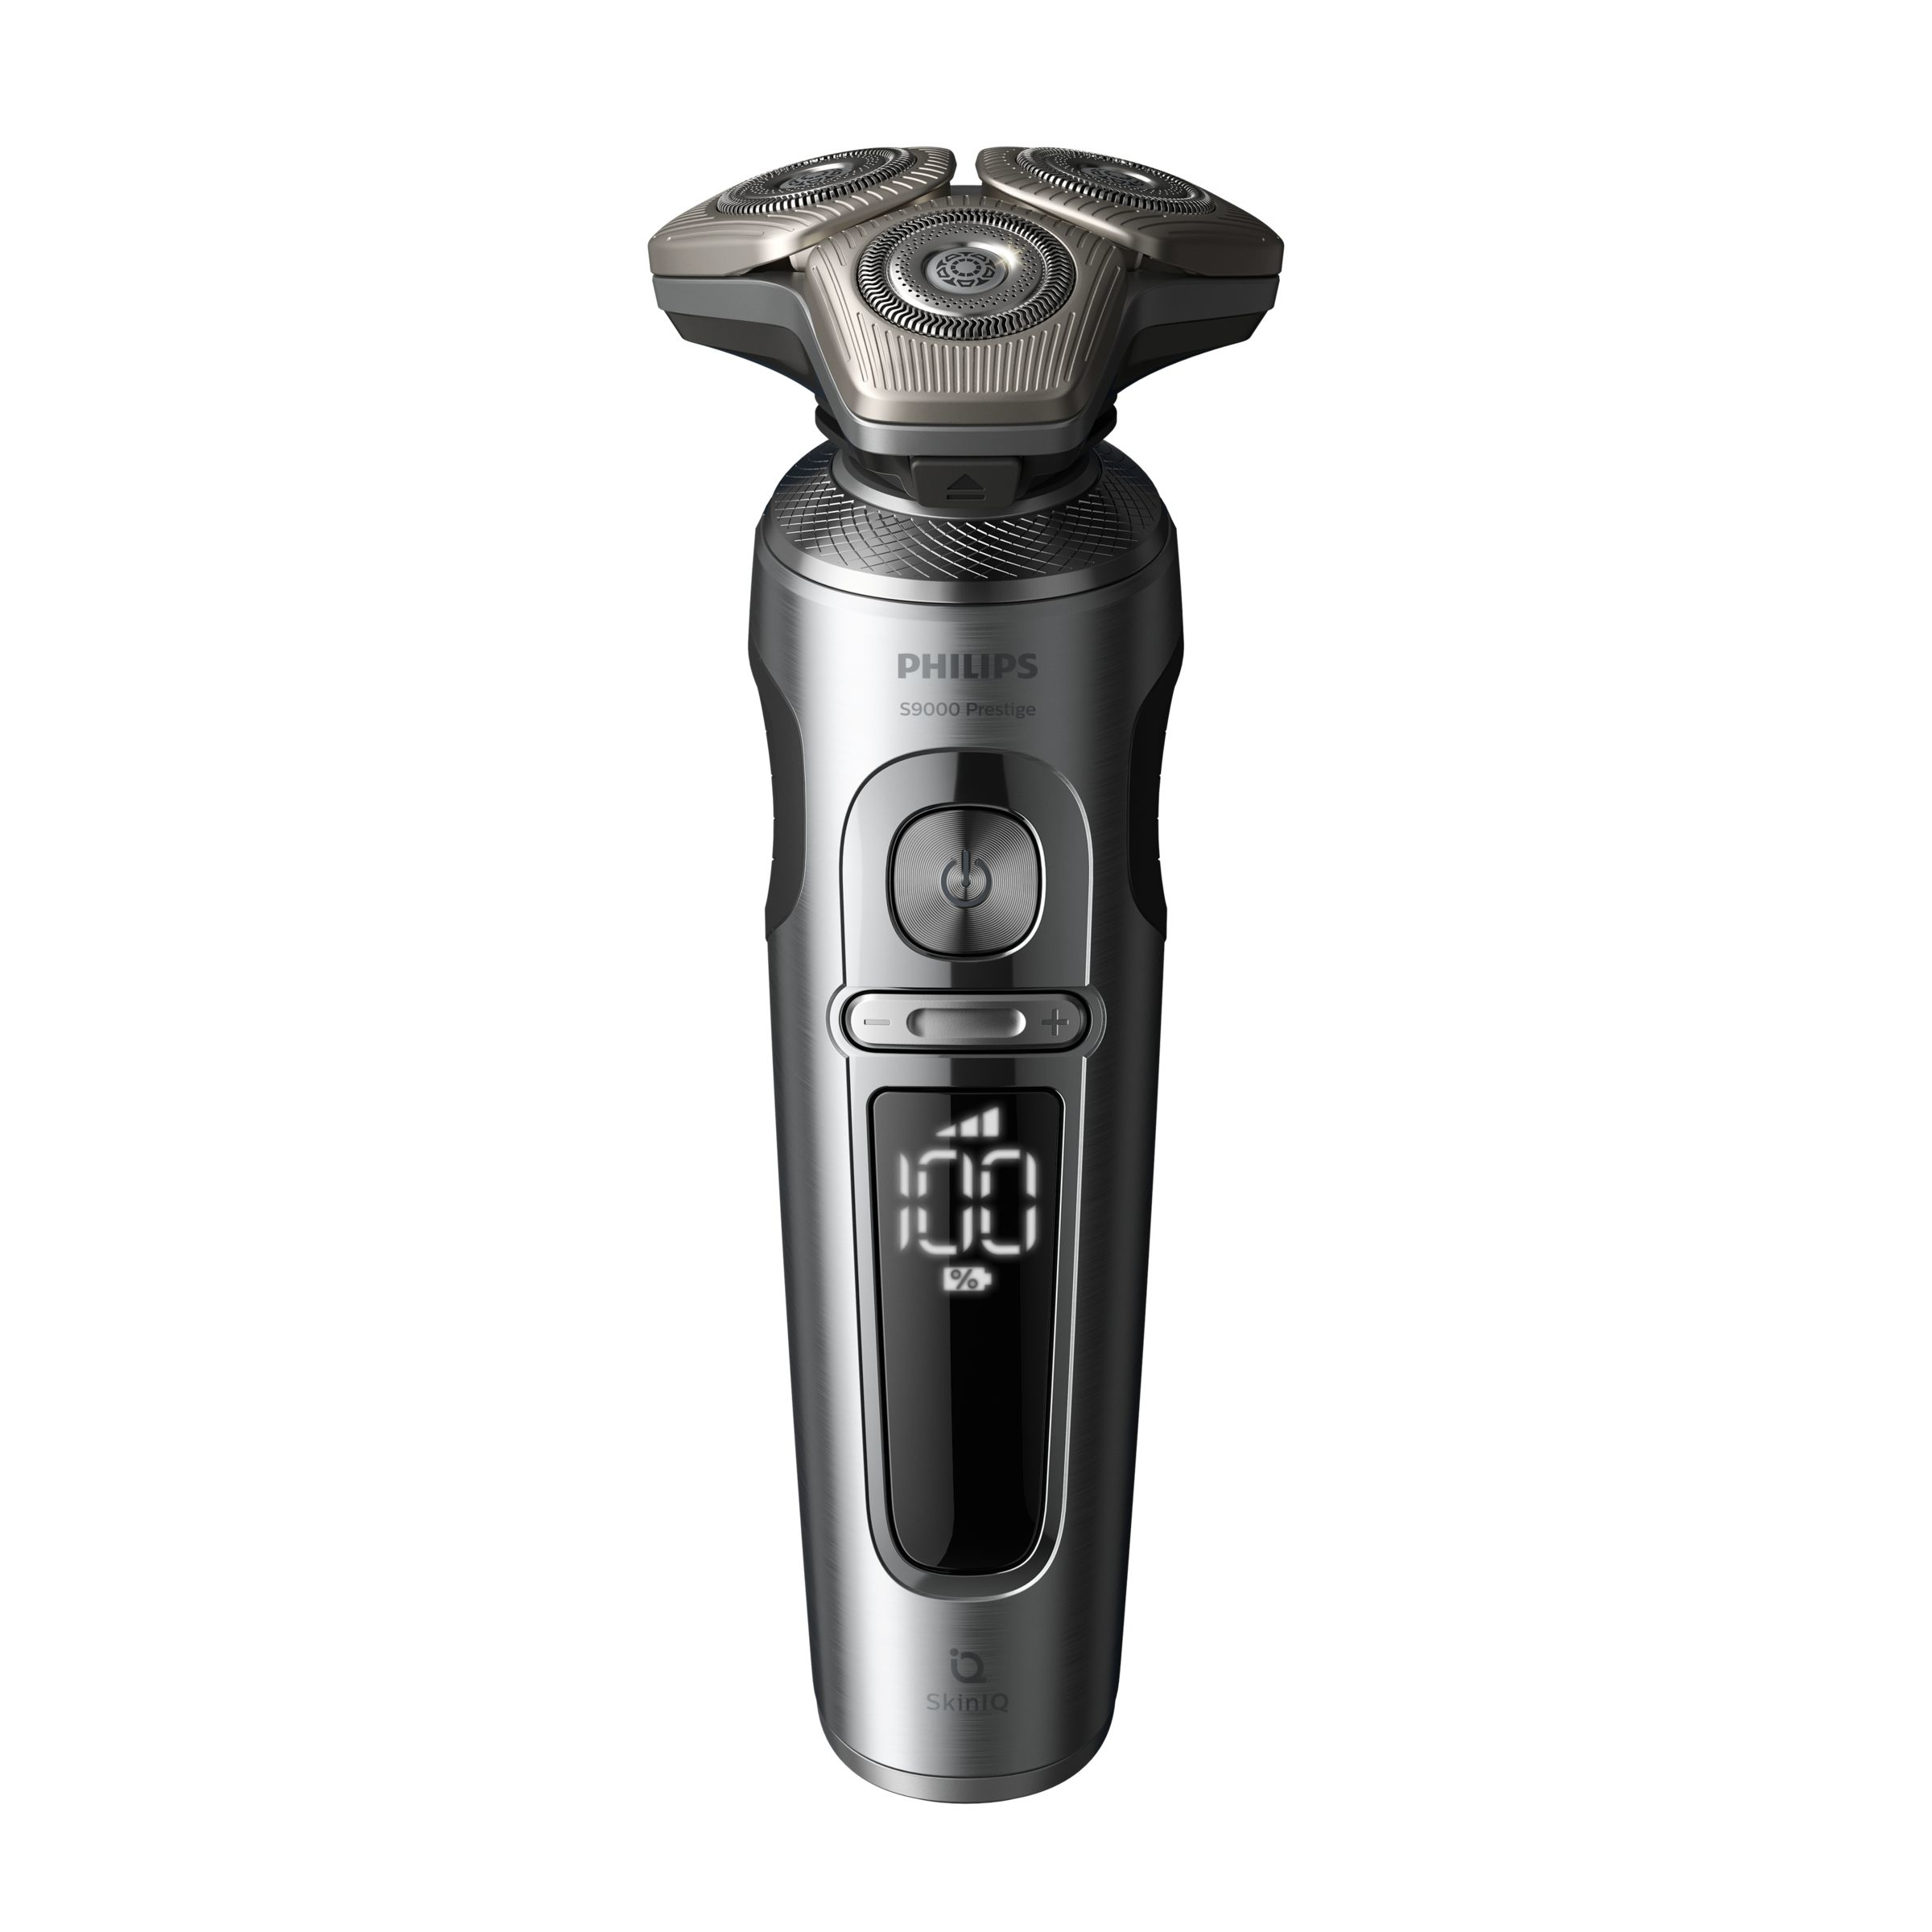 Philips Shaver S9000 Prestige SP9871/22 Wet and dry electric shaver, Series 9000